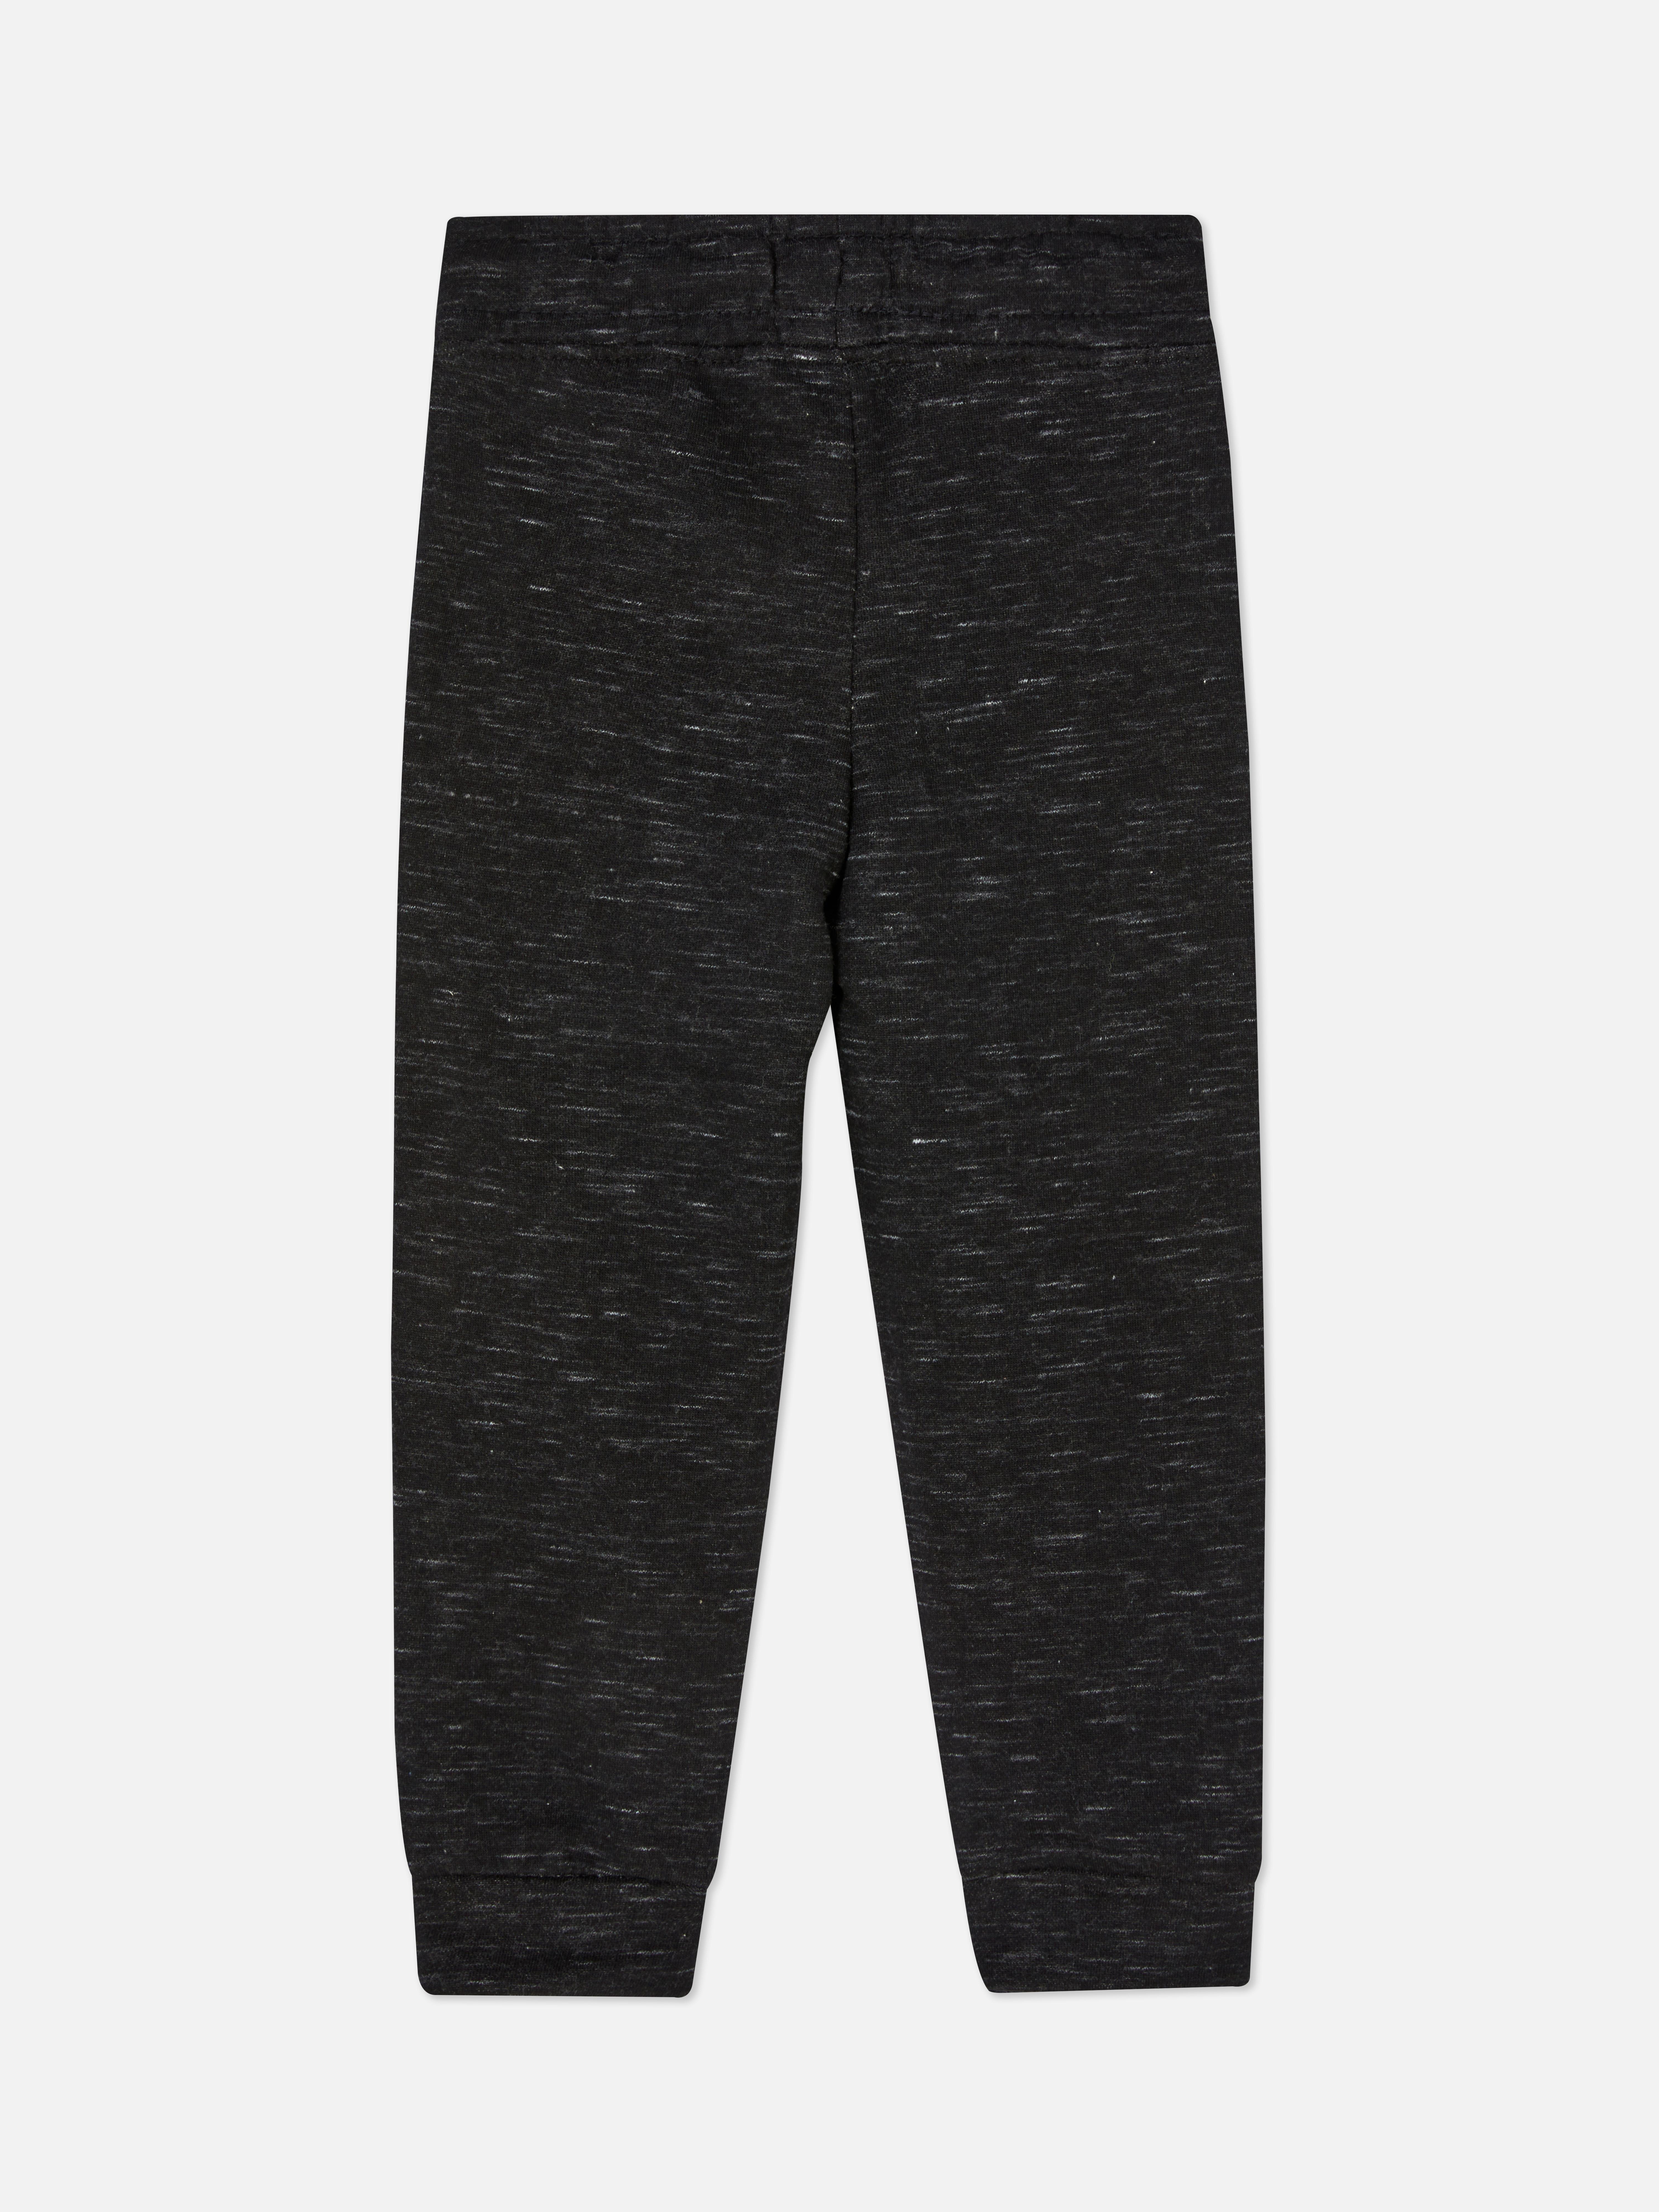 Grindle Cuffed Joggers